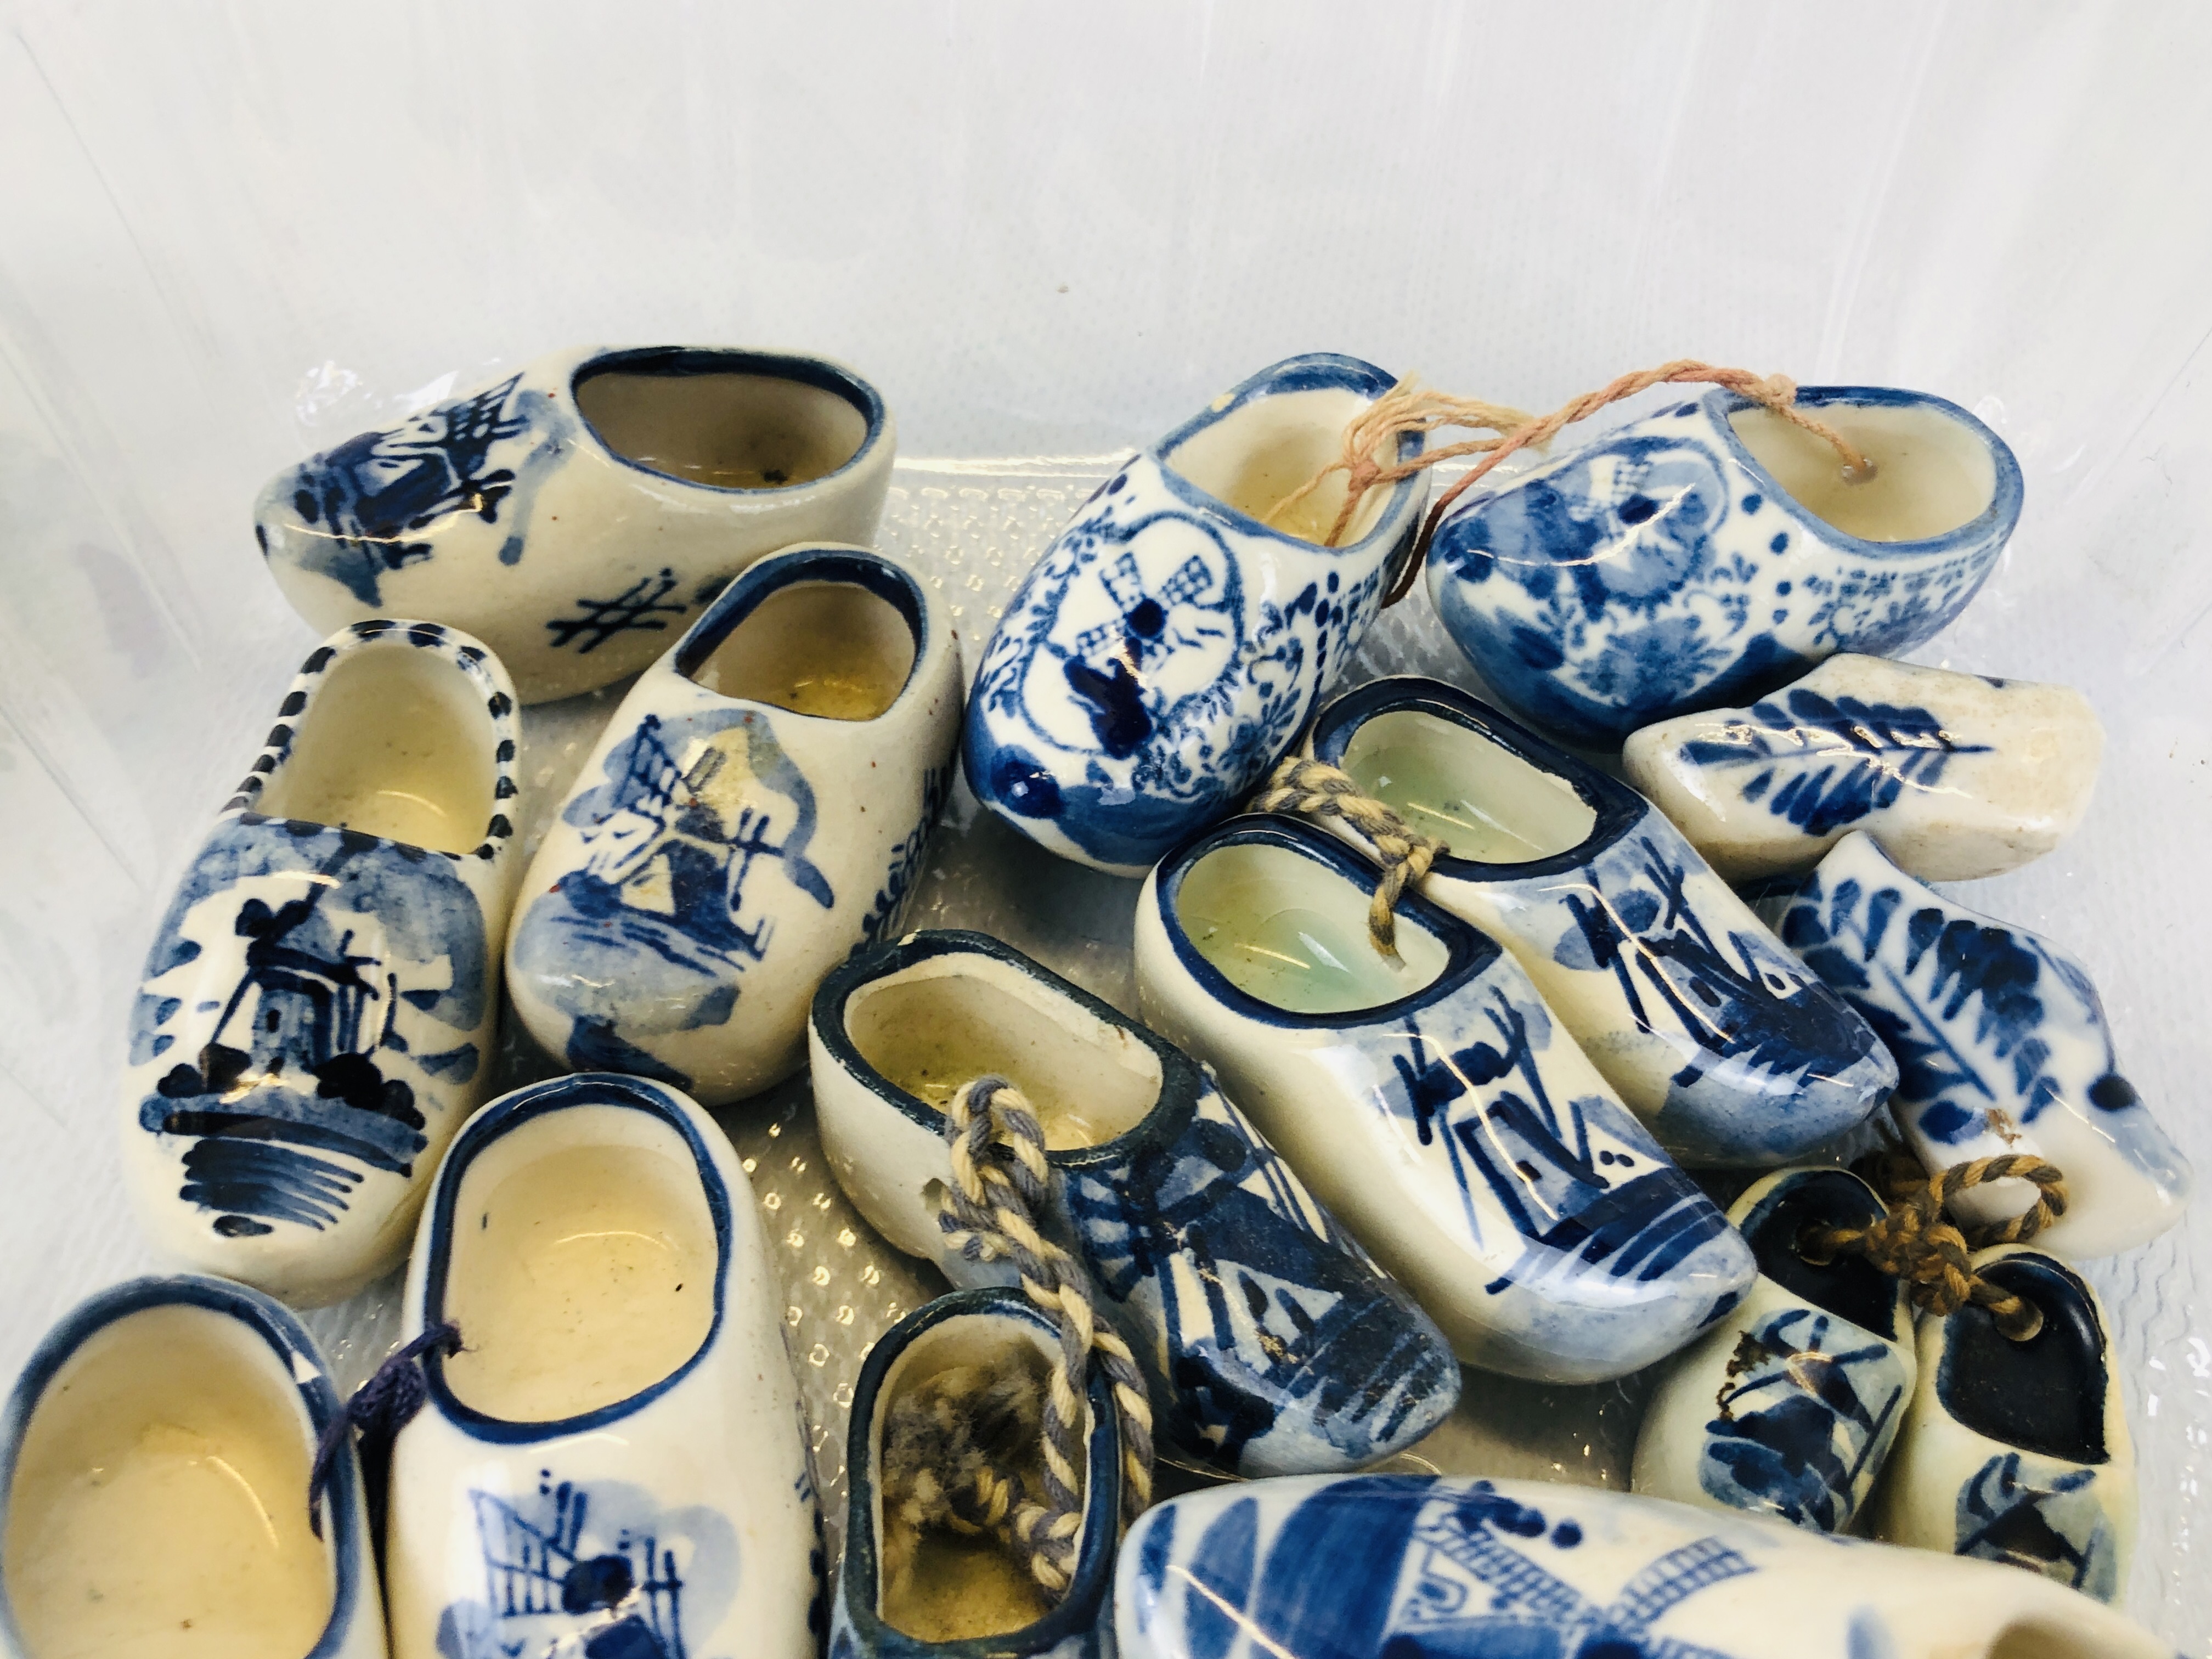 AN EXTENSIVE COLLECTION OF MINIATURE DELFT CLOGS. - Image 6 of 9